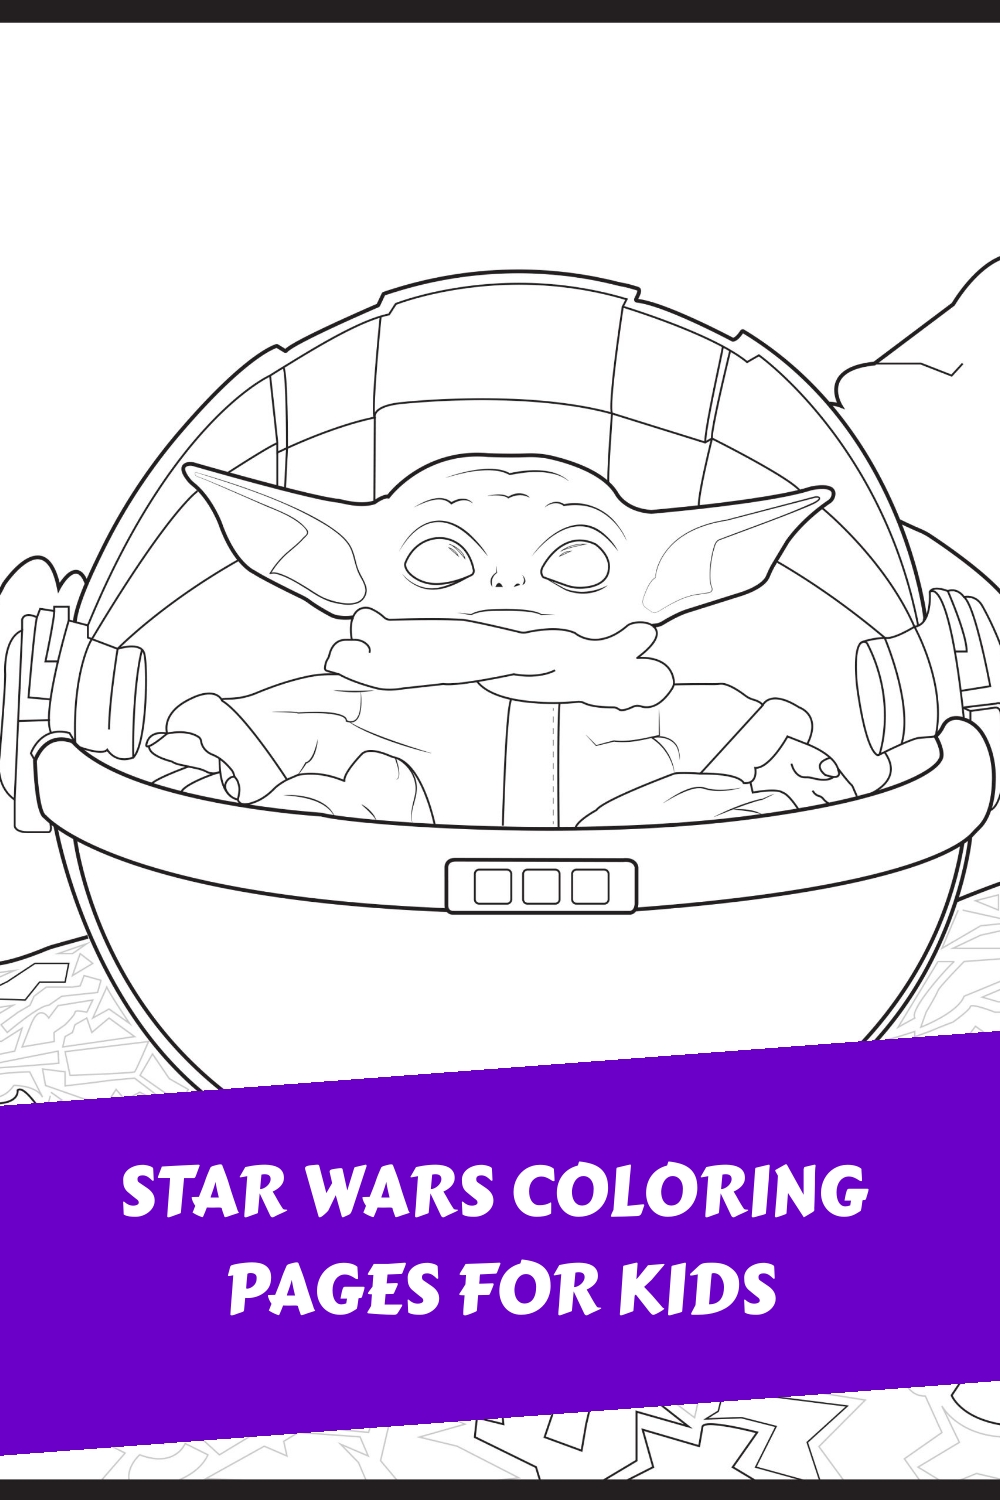 Star Wars Coloring Pages for Kids generated pin 57556